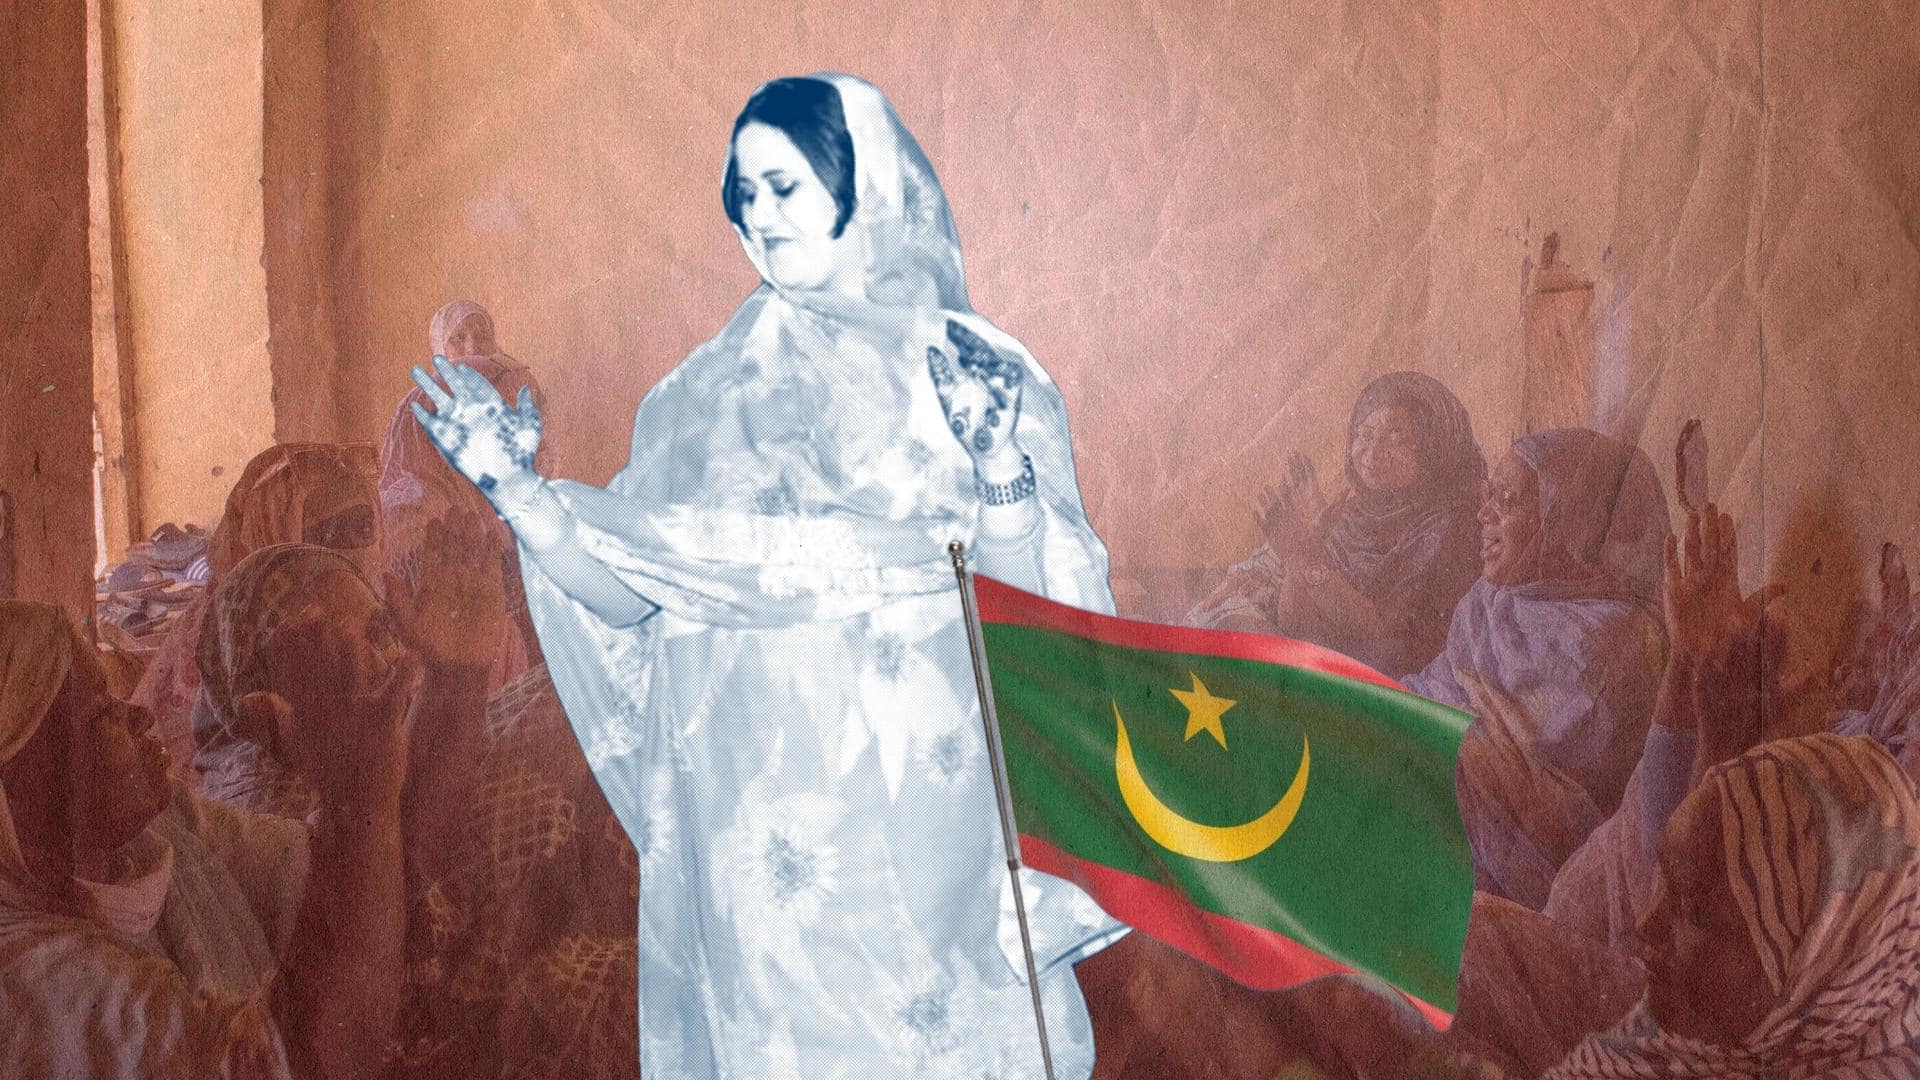 Shifting perspectives: Divorce parties gain momentum, inspired by Mauritanian women